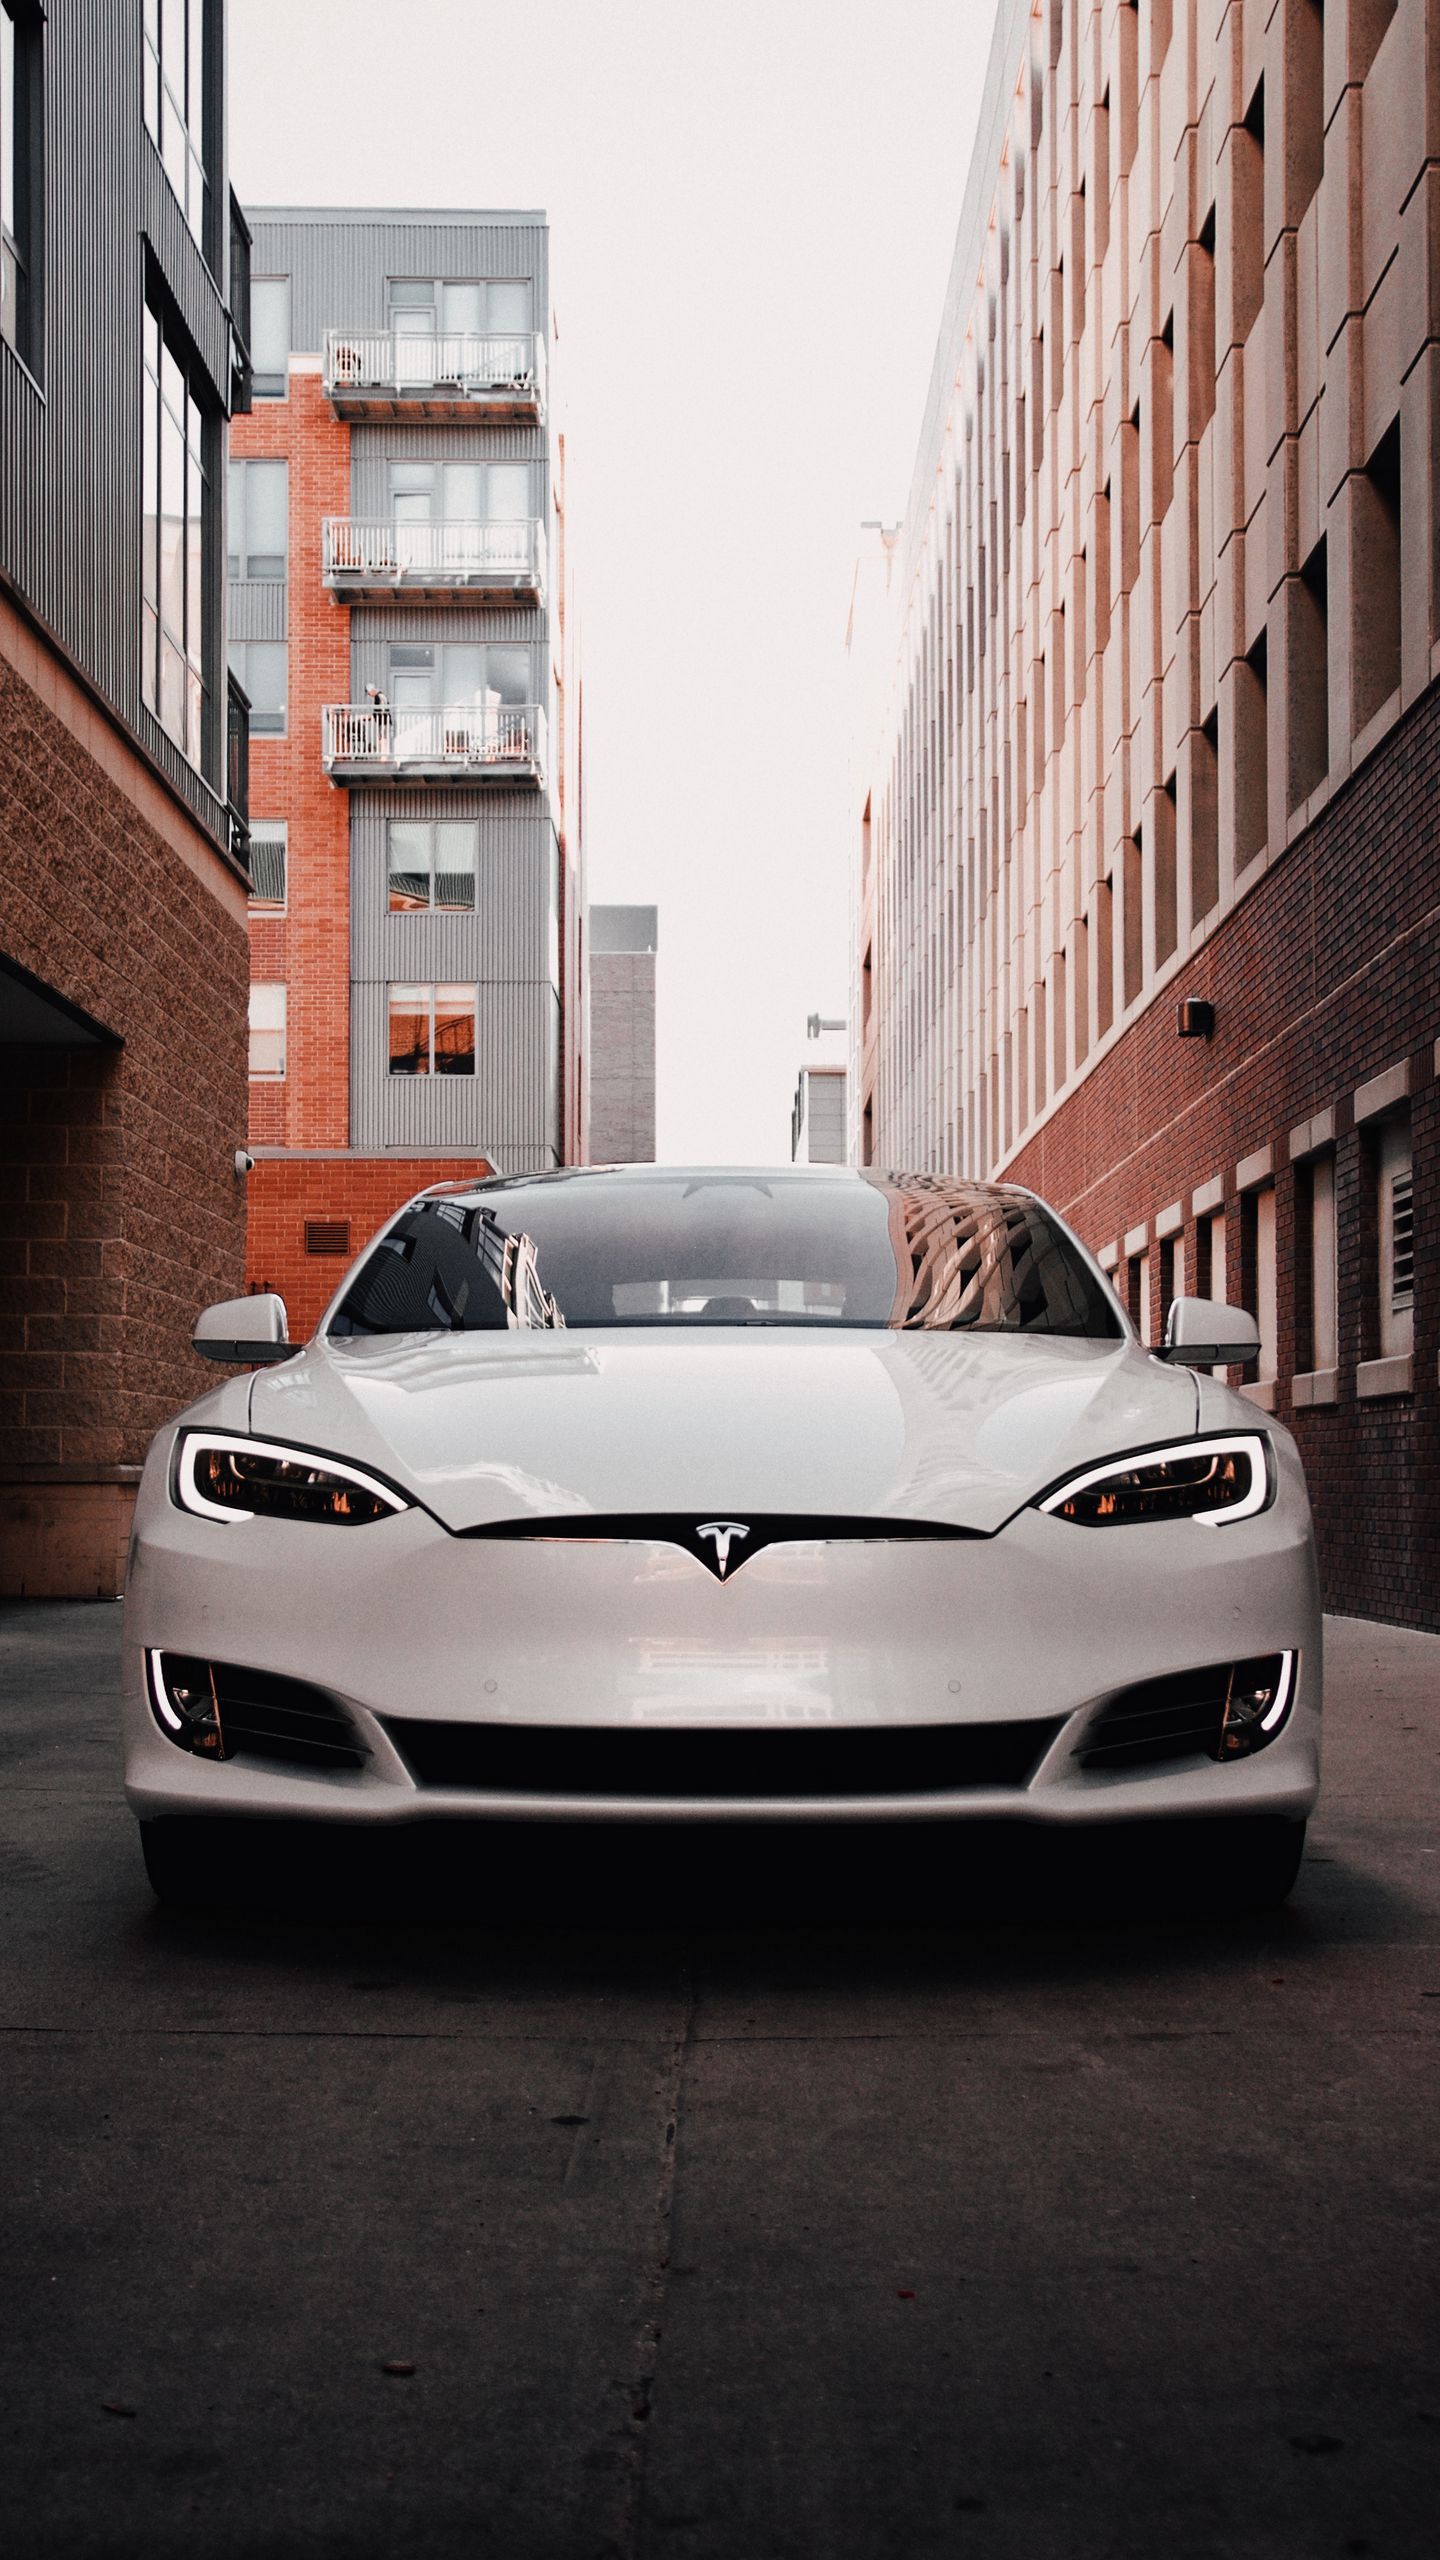 Download wallpaper 1440x2560 tesla model s, tesla, car, electric car, white, front view qhd samsung galaxy s s edge, note, lg g4 HD background